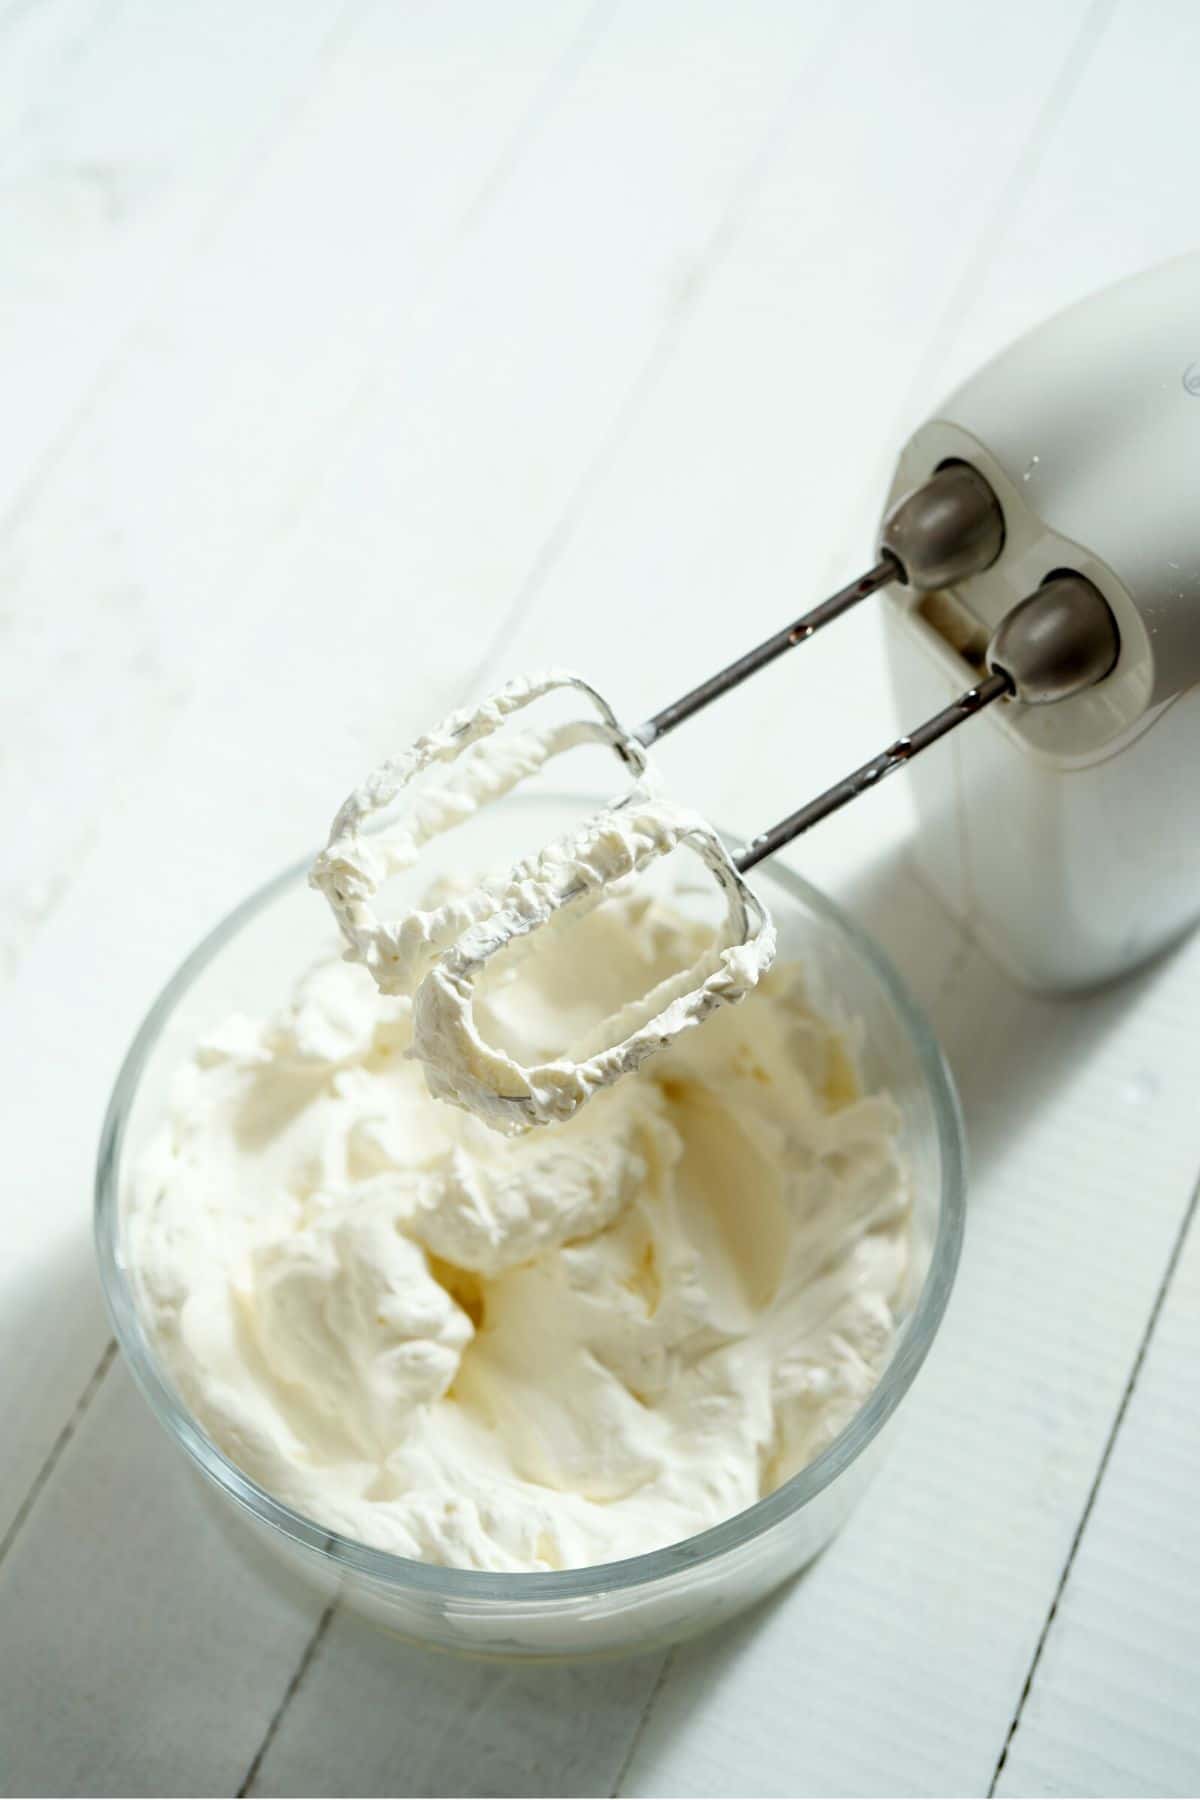 whipped cream in a glass bowl with hand mixer